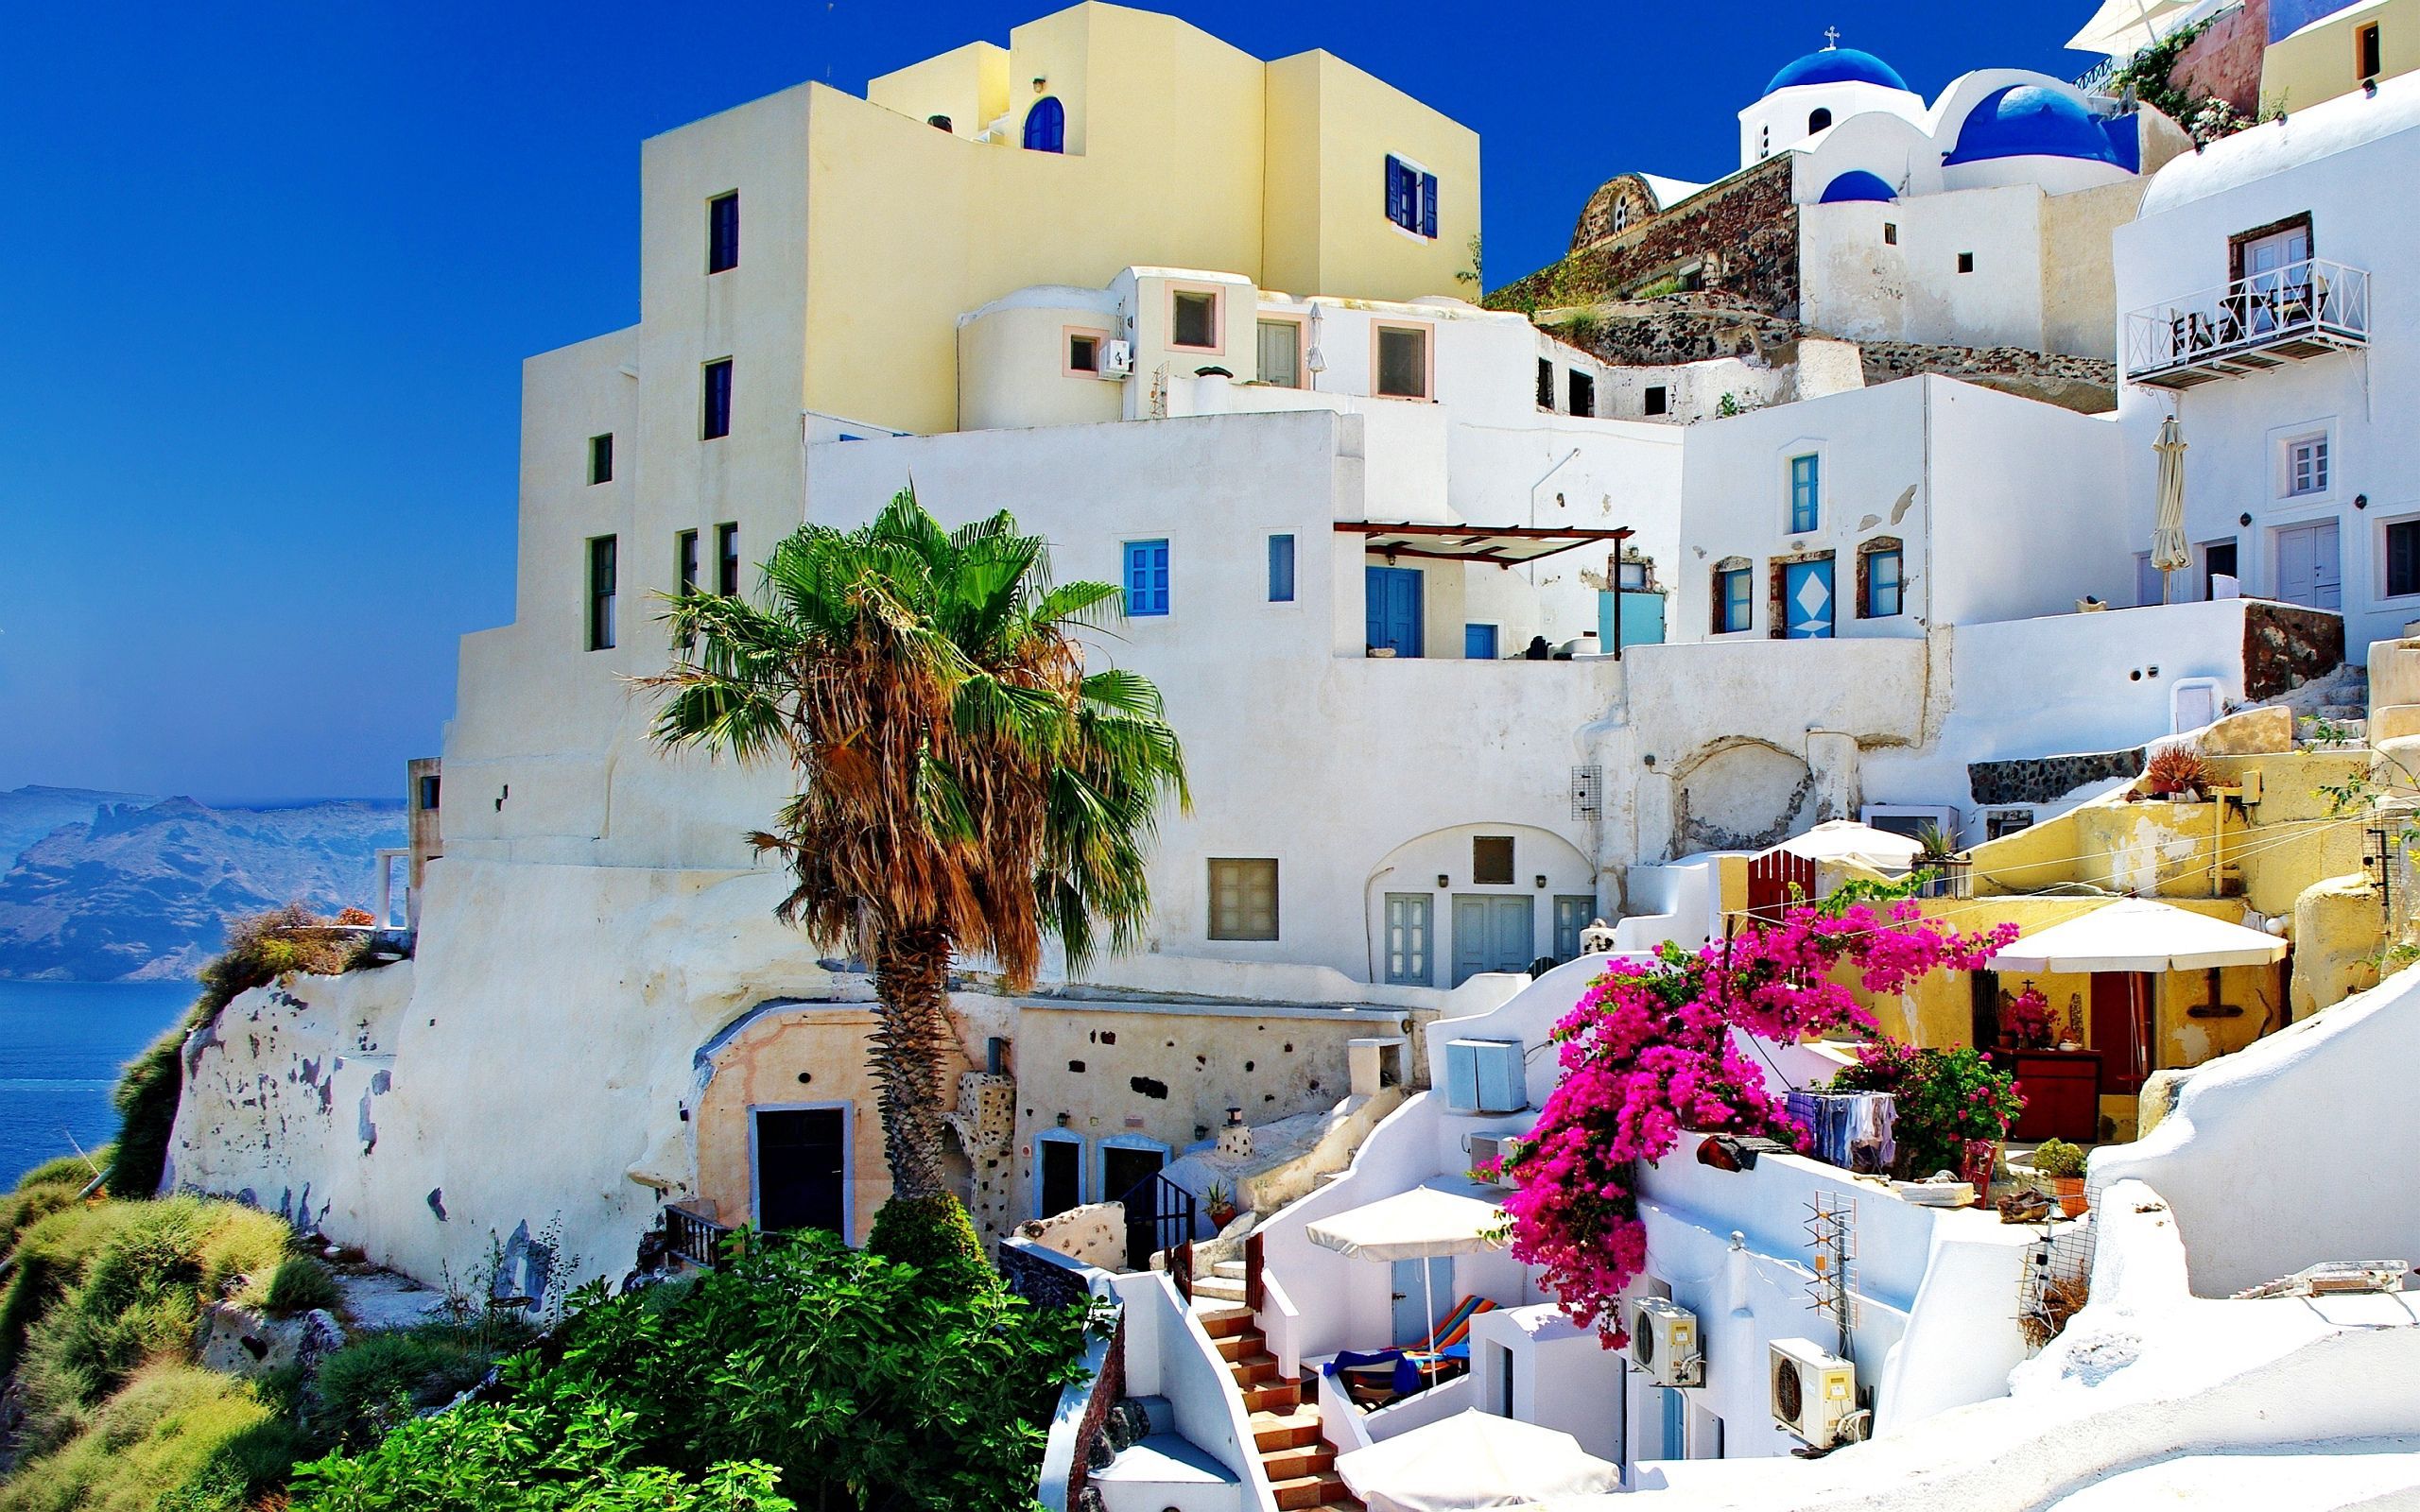 Oia santorini in greece Wallpapers | Pictures